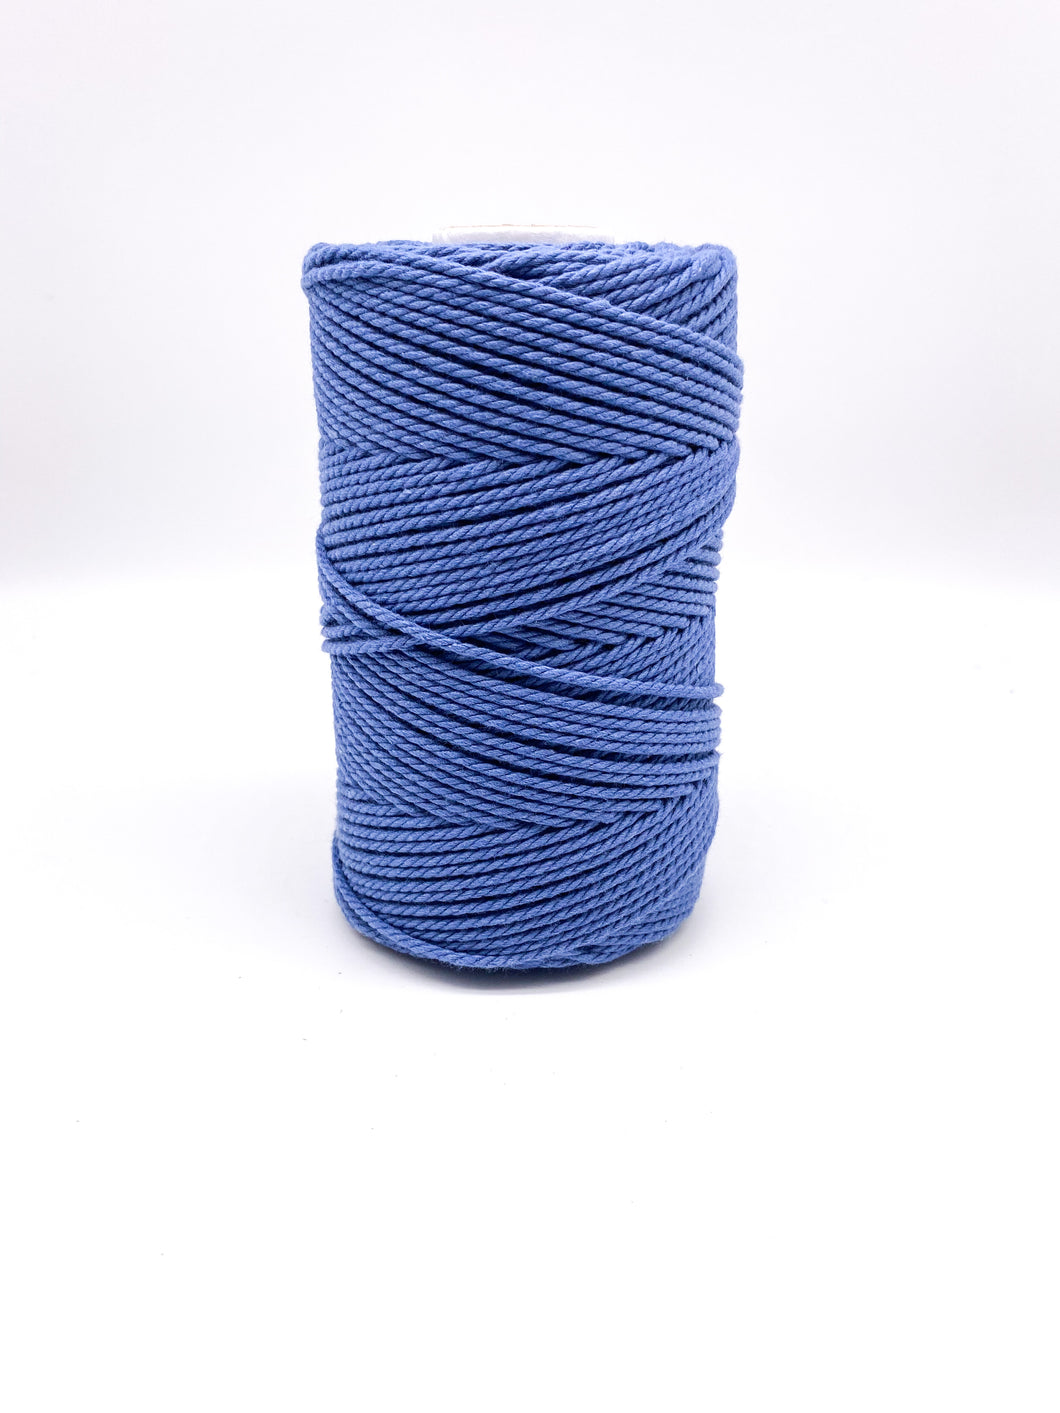 2.5mm MARINE BLUE twisted rope - Clover Creations UK